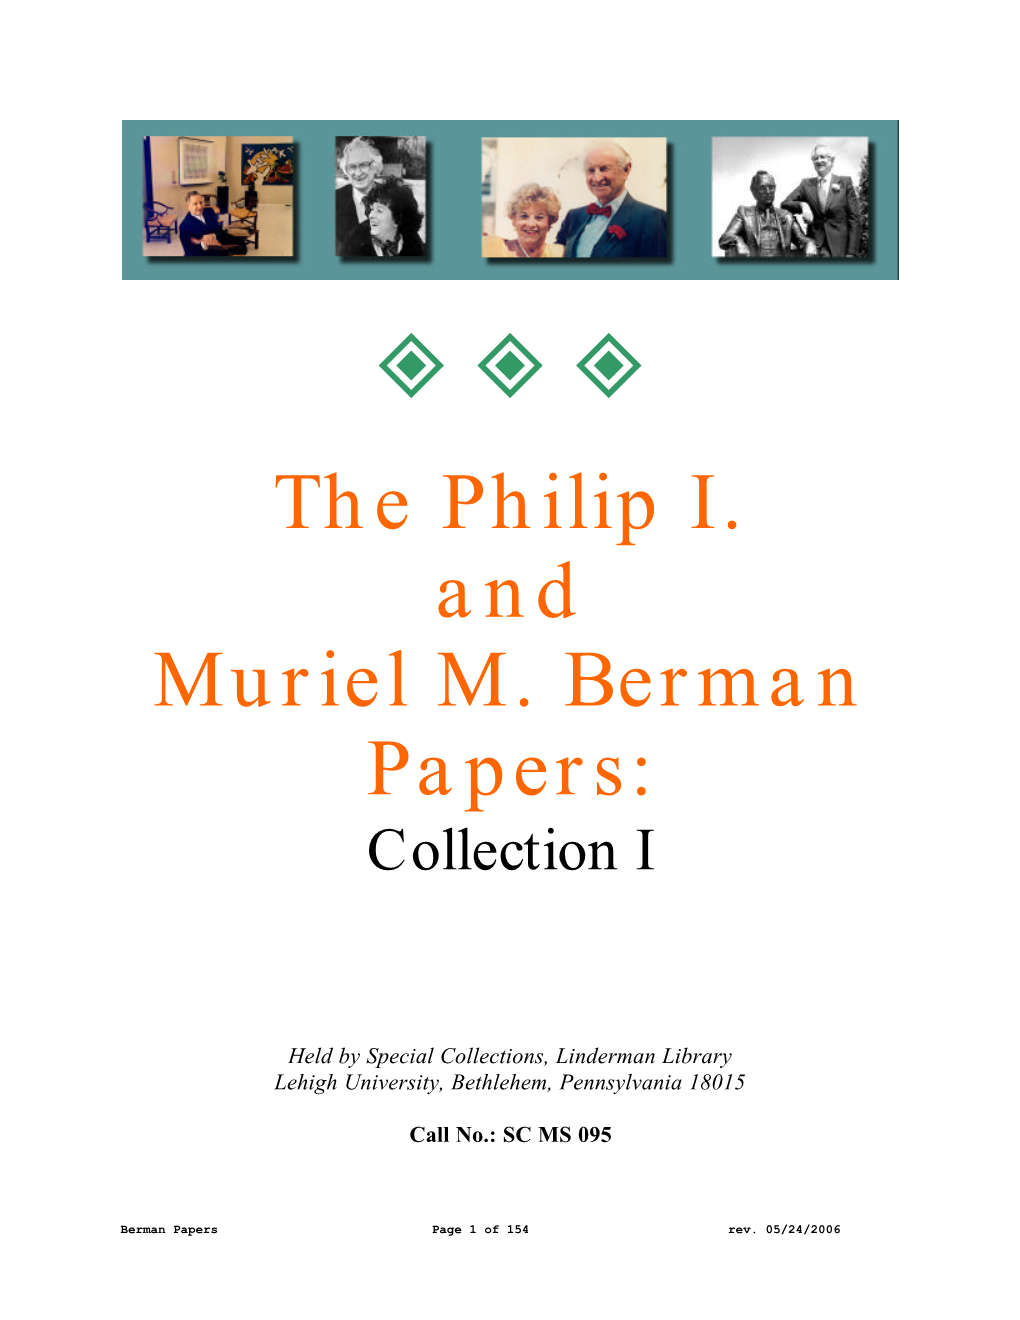 The Philip I. and Muriel M. Berman Papers: Collection I